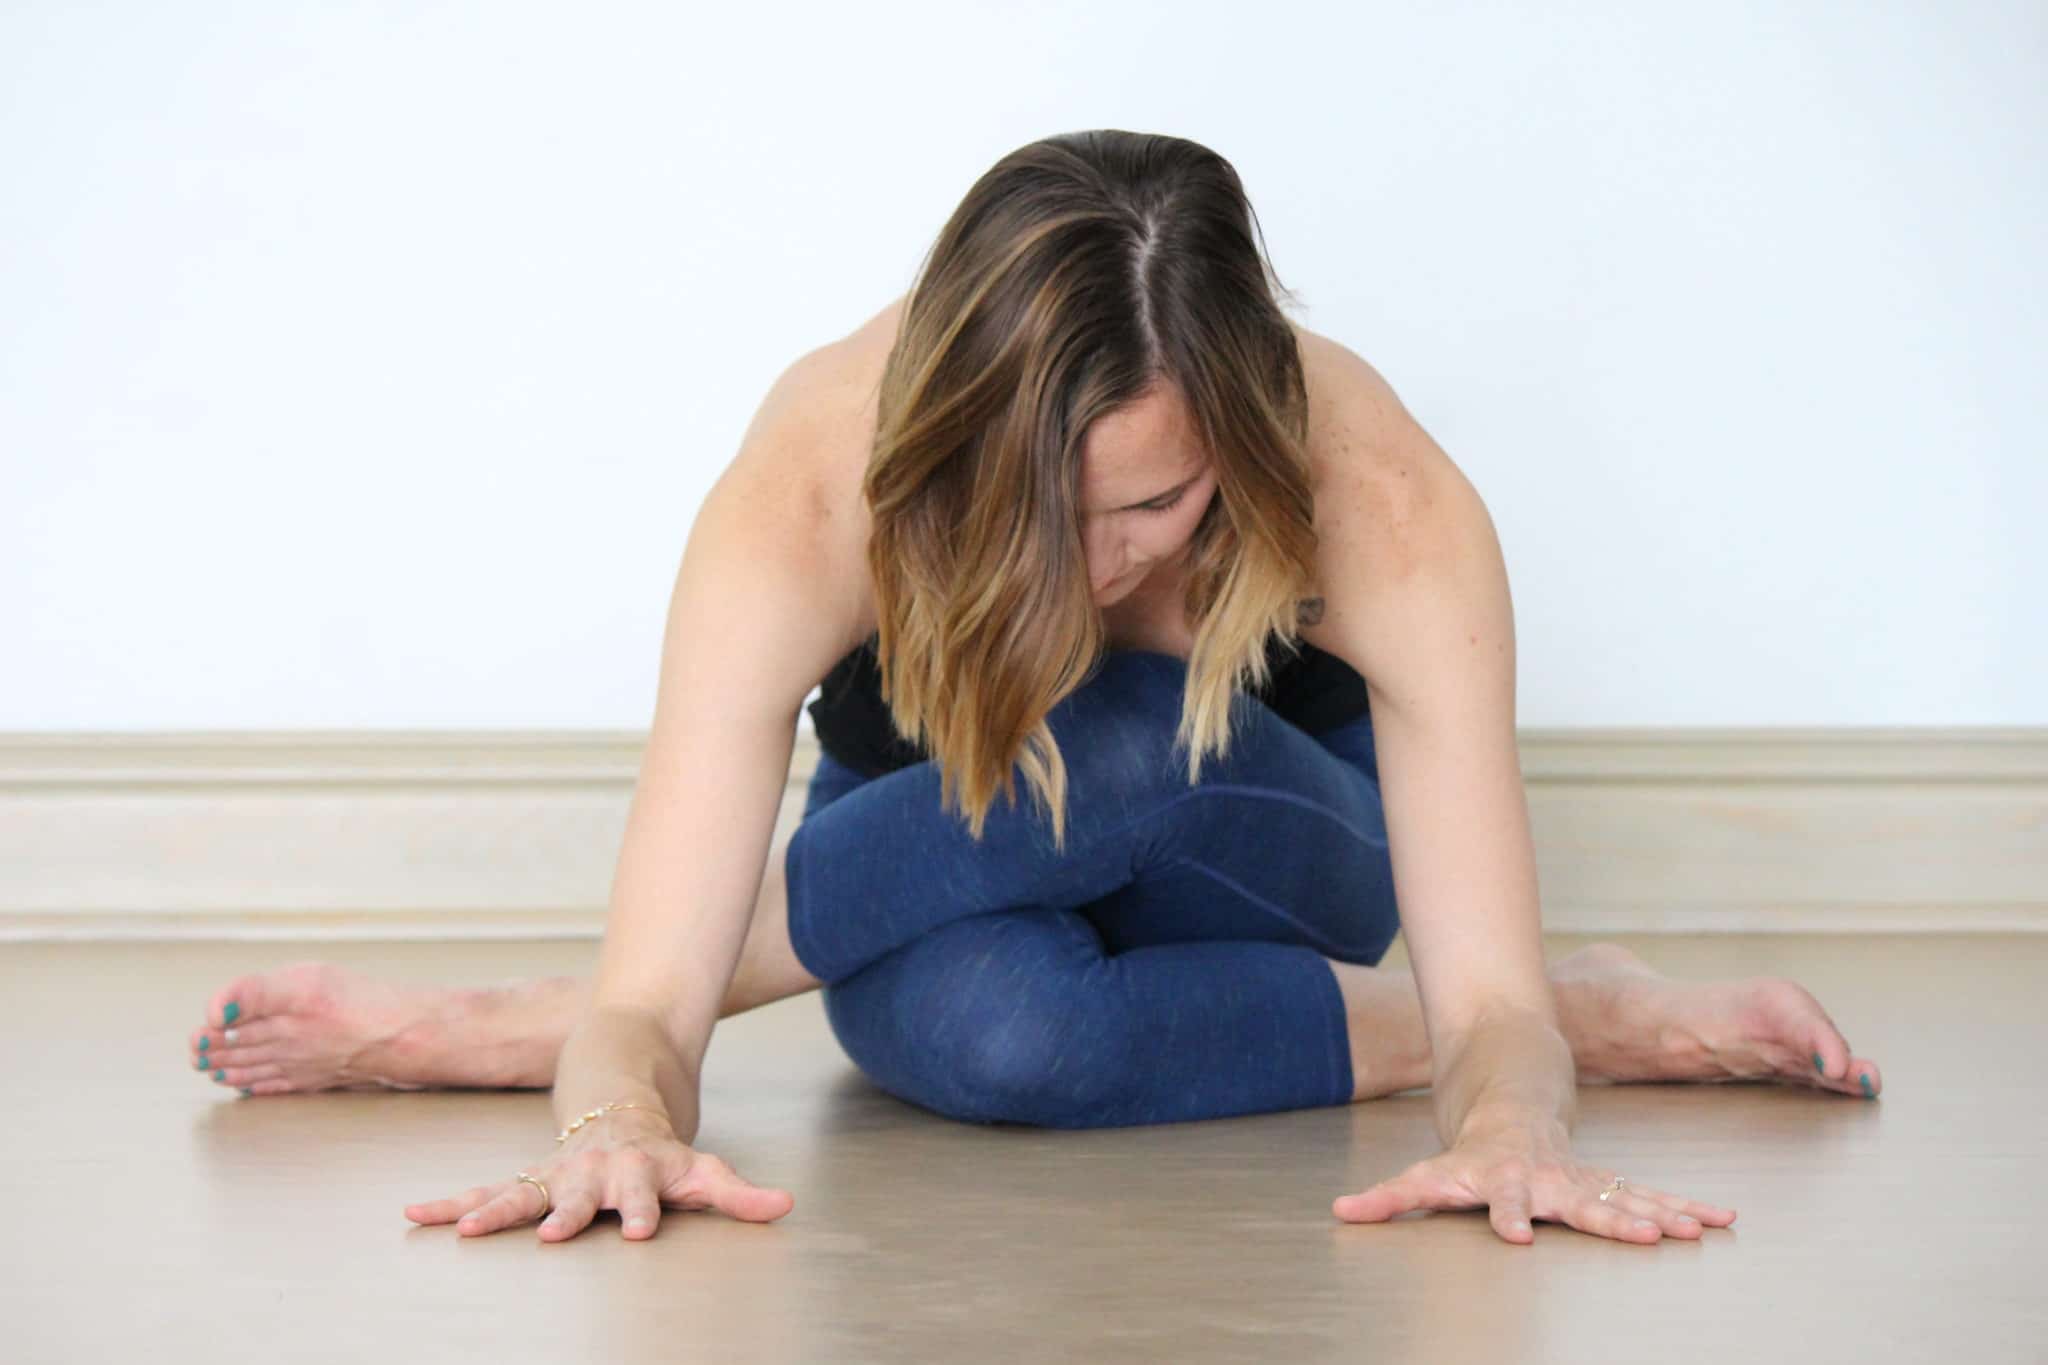 Yin Yoga for Anxiety  Guided Yin Yoga Sequence for Stillness